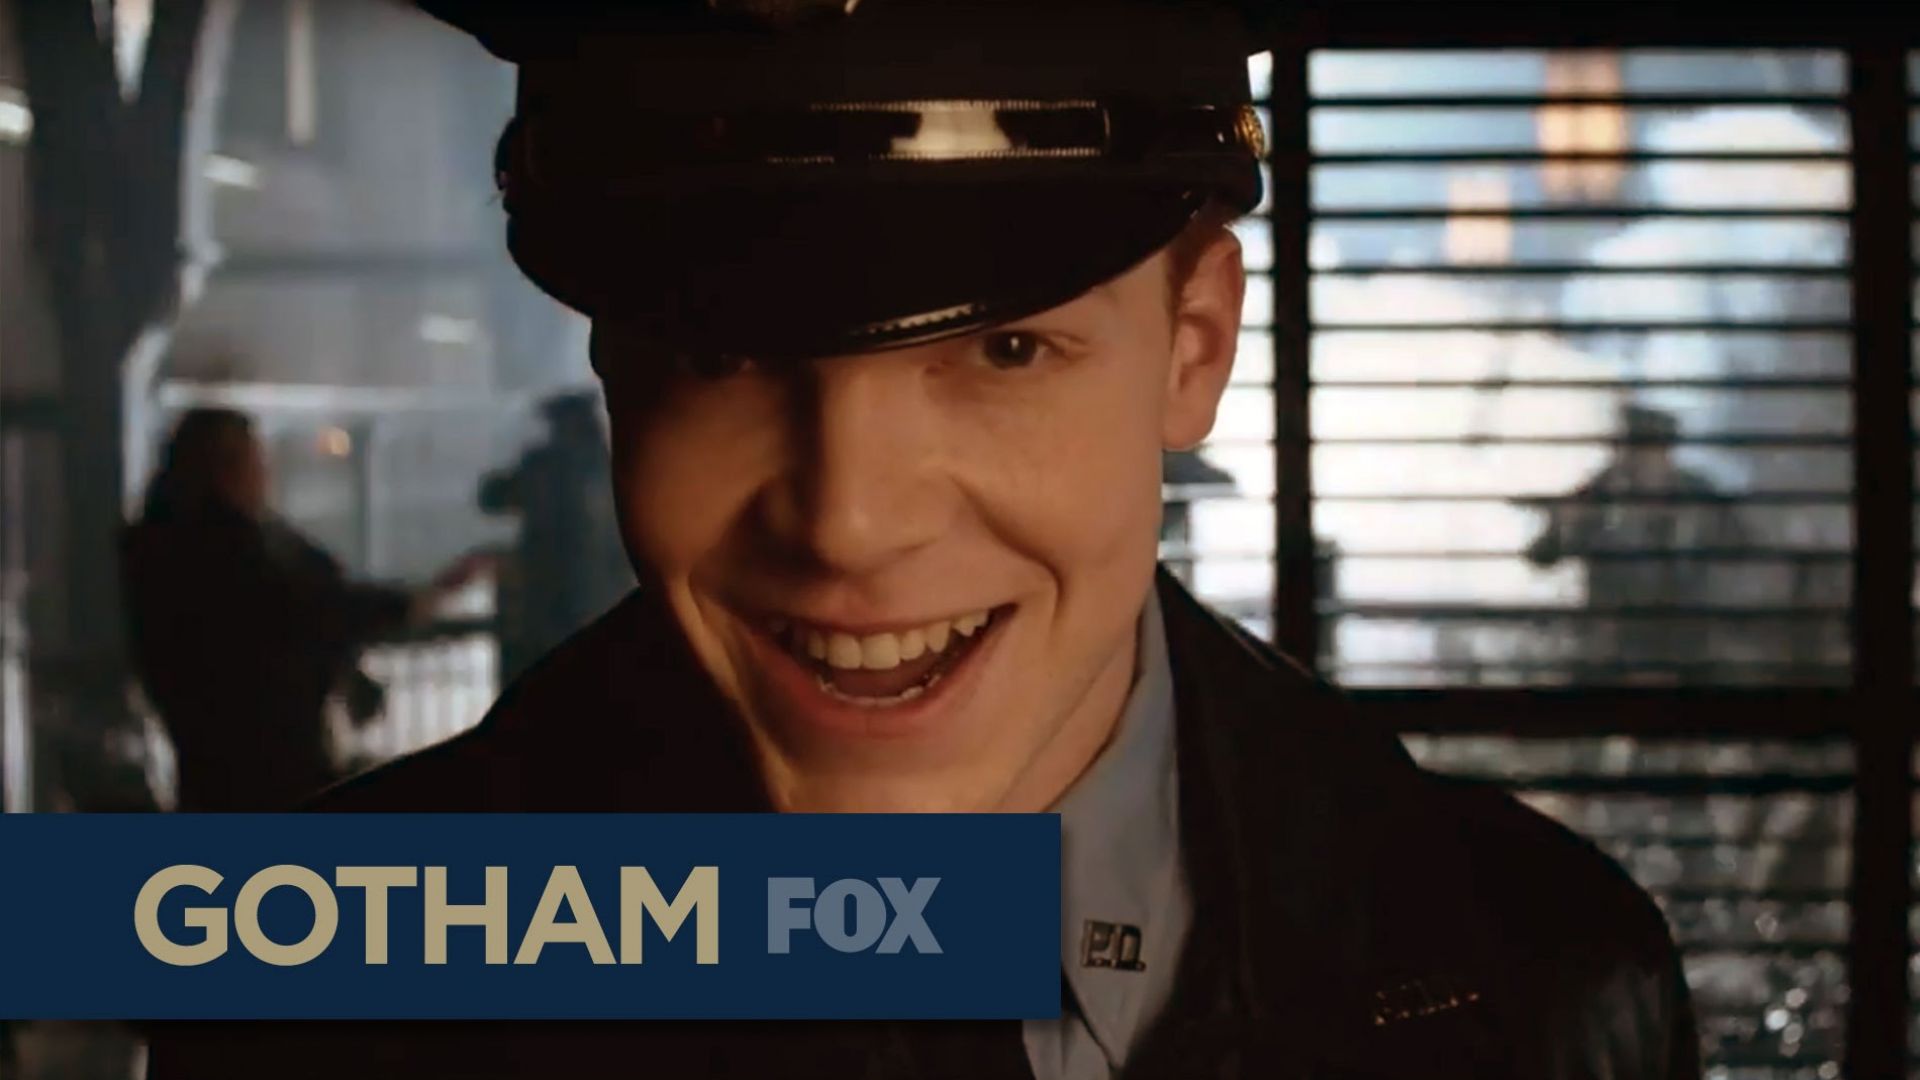 Gotham Season 2 will tell the story of how the Joker came to